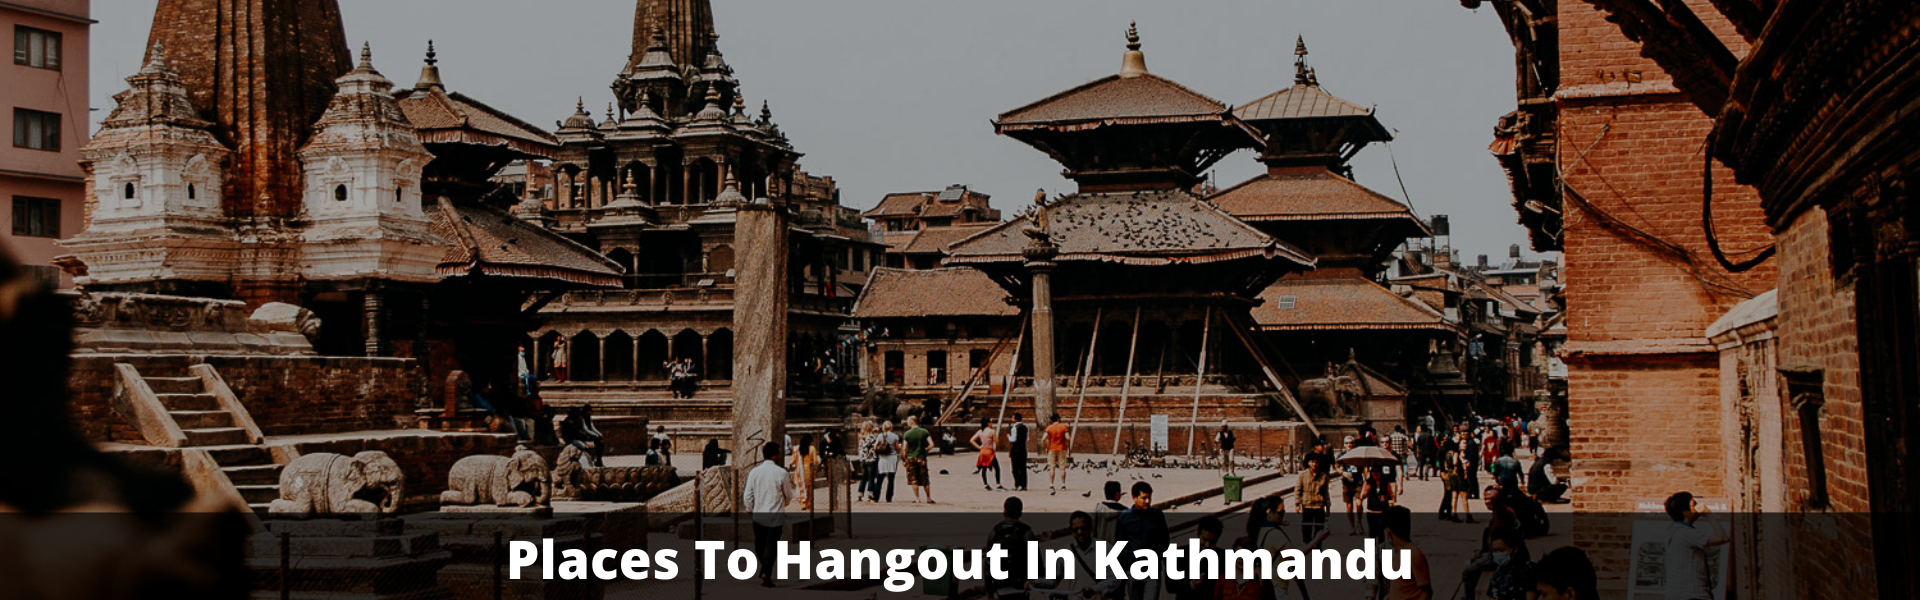 visit different temple in kathmandu, see their cultural heritage importance